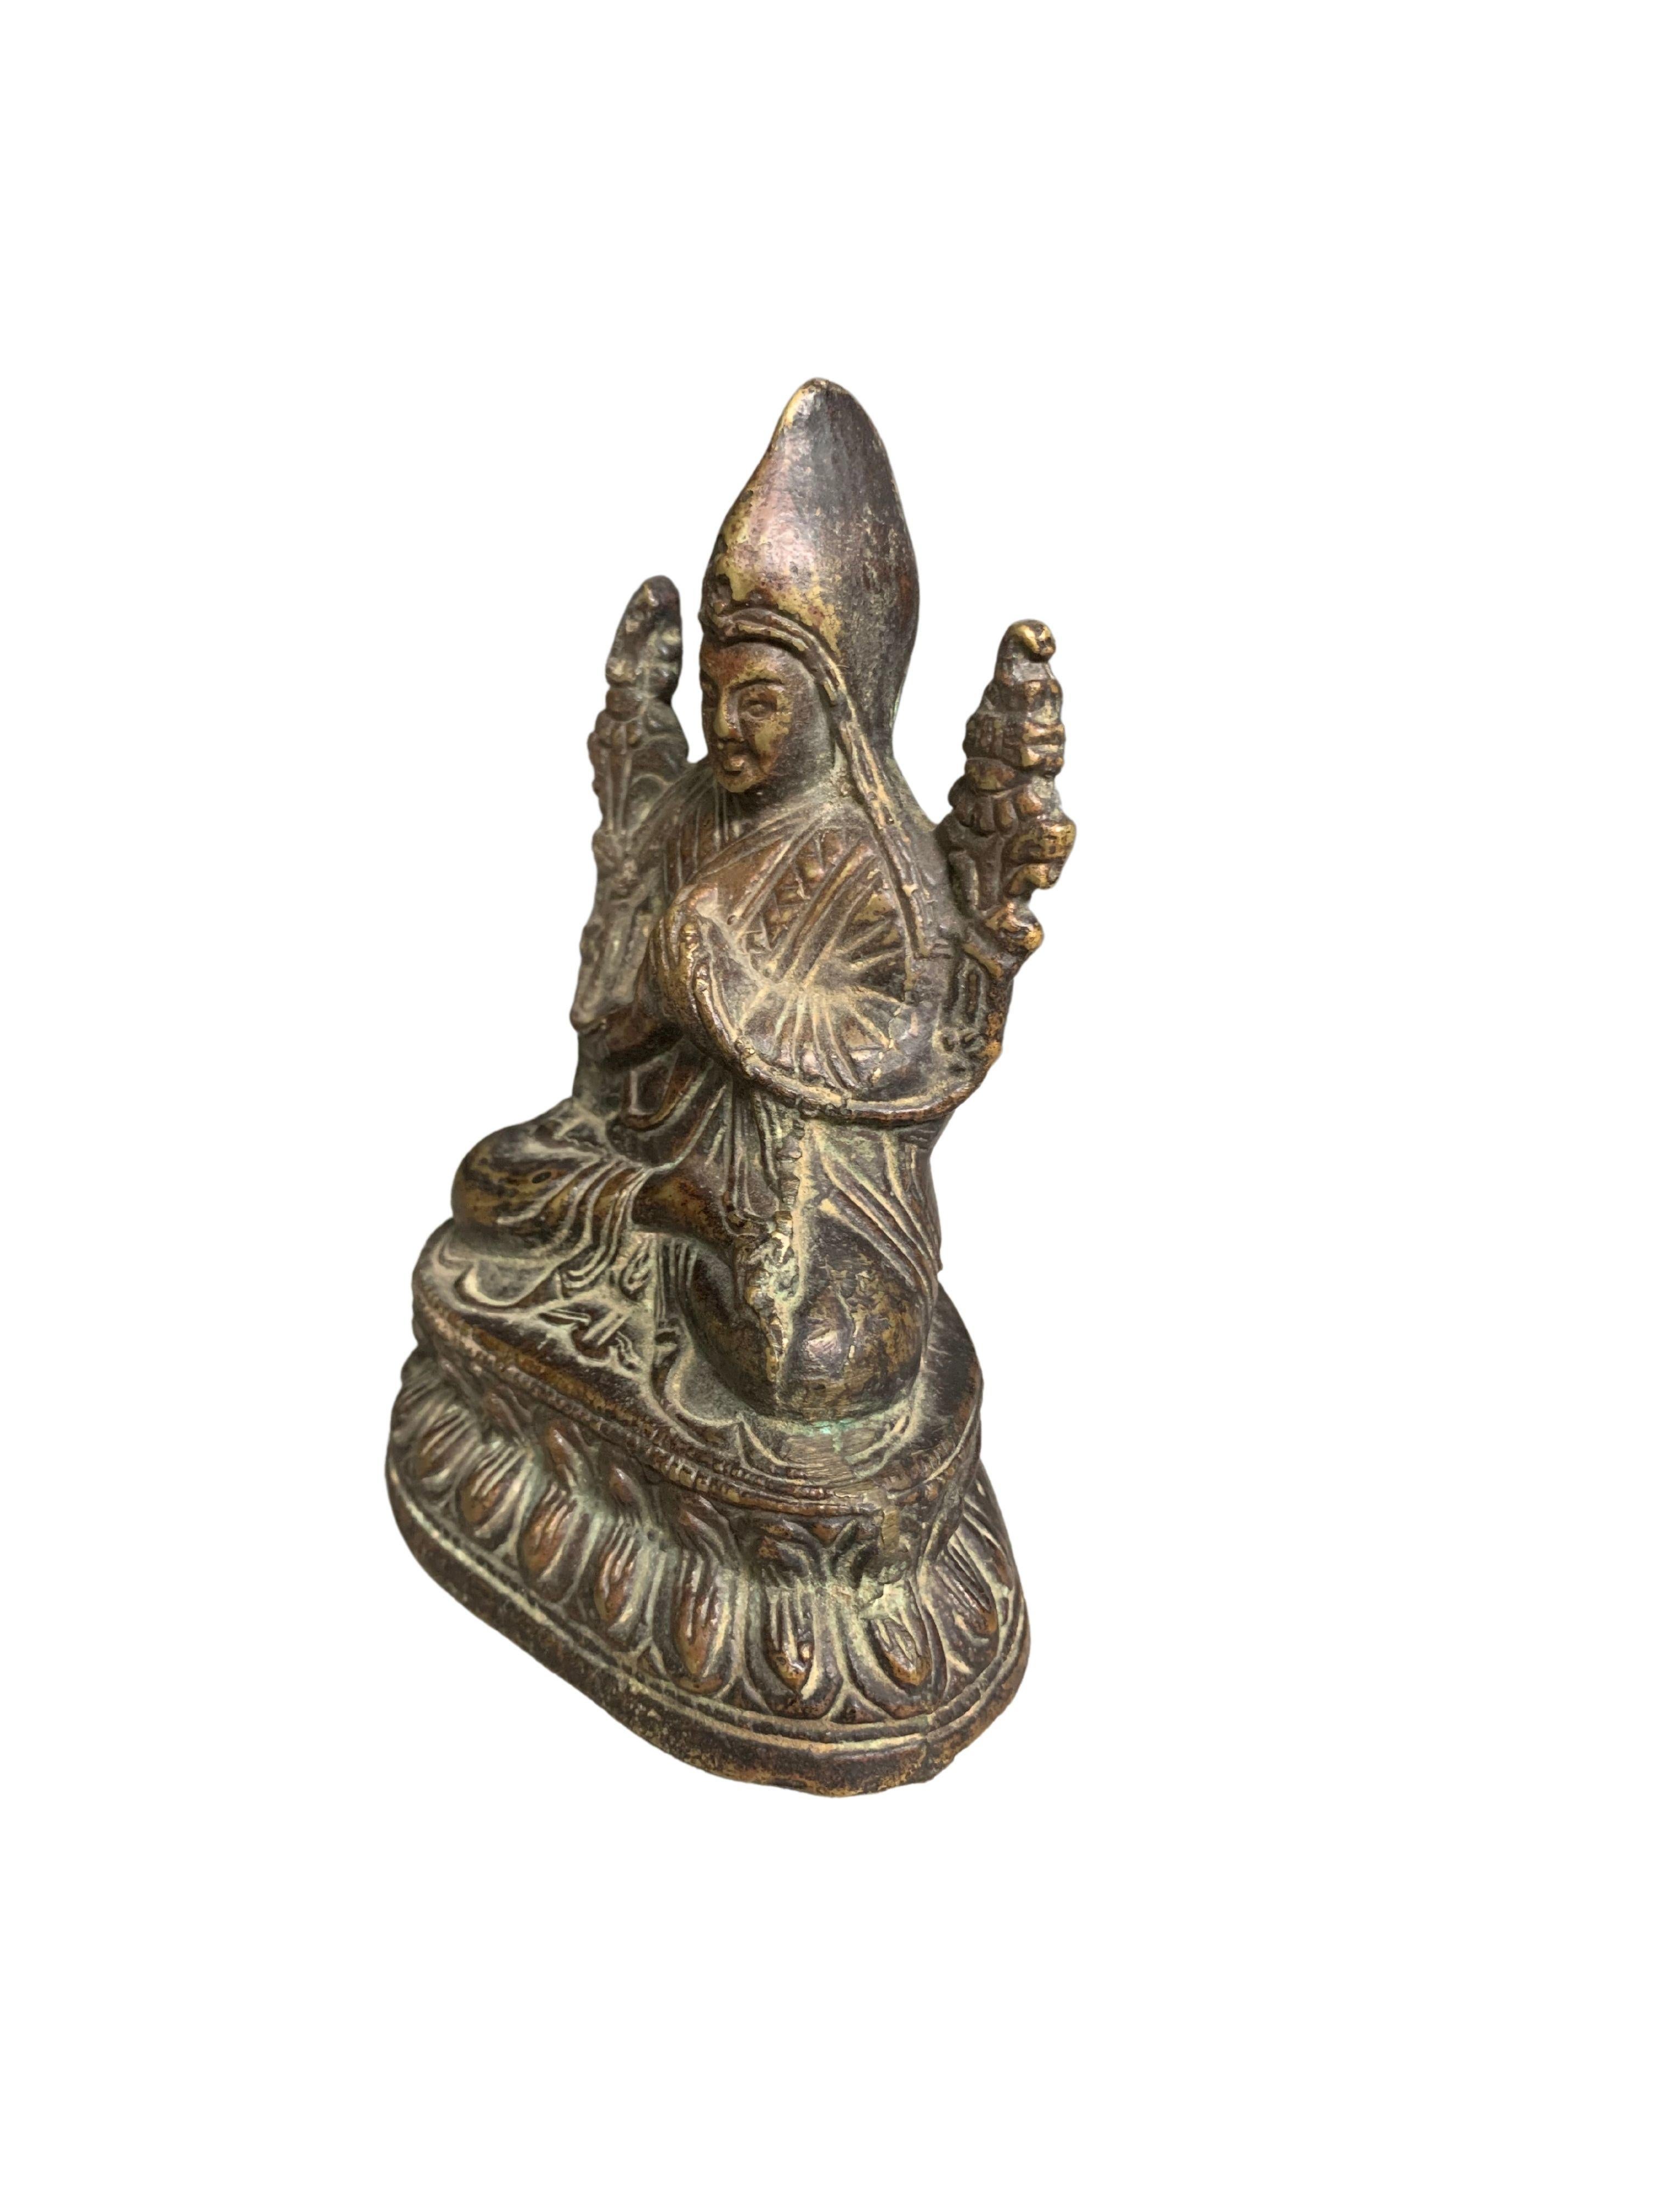 Cast Small Tibetan Seated Buddha from Bronze, c. 1850 For Sale